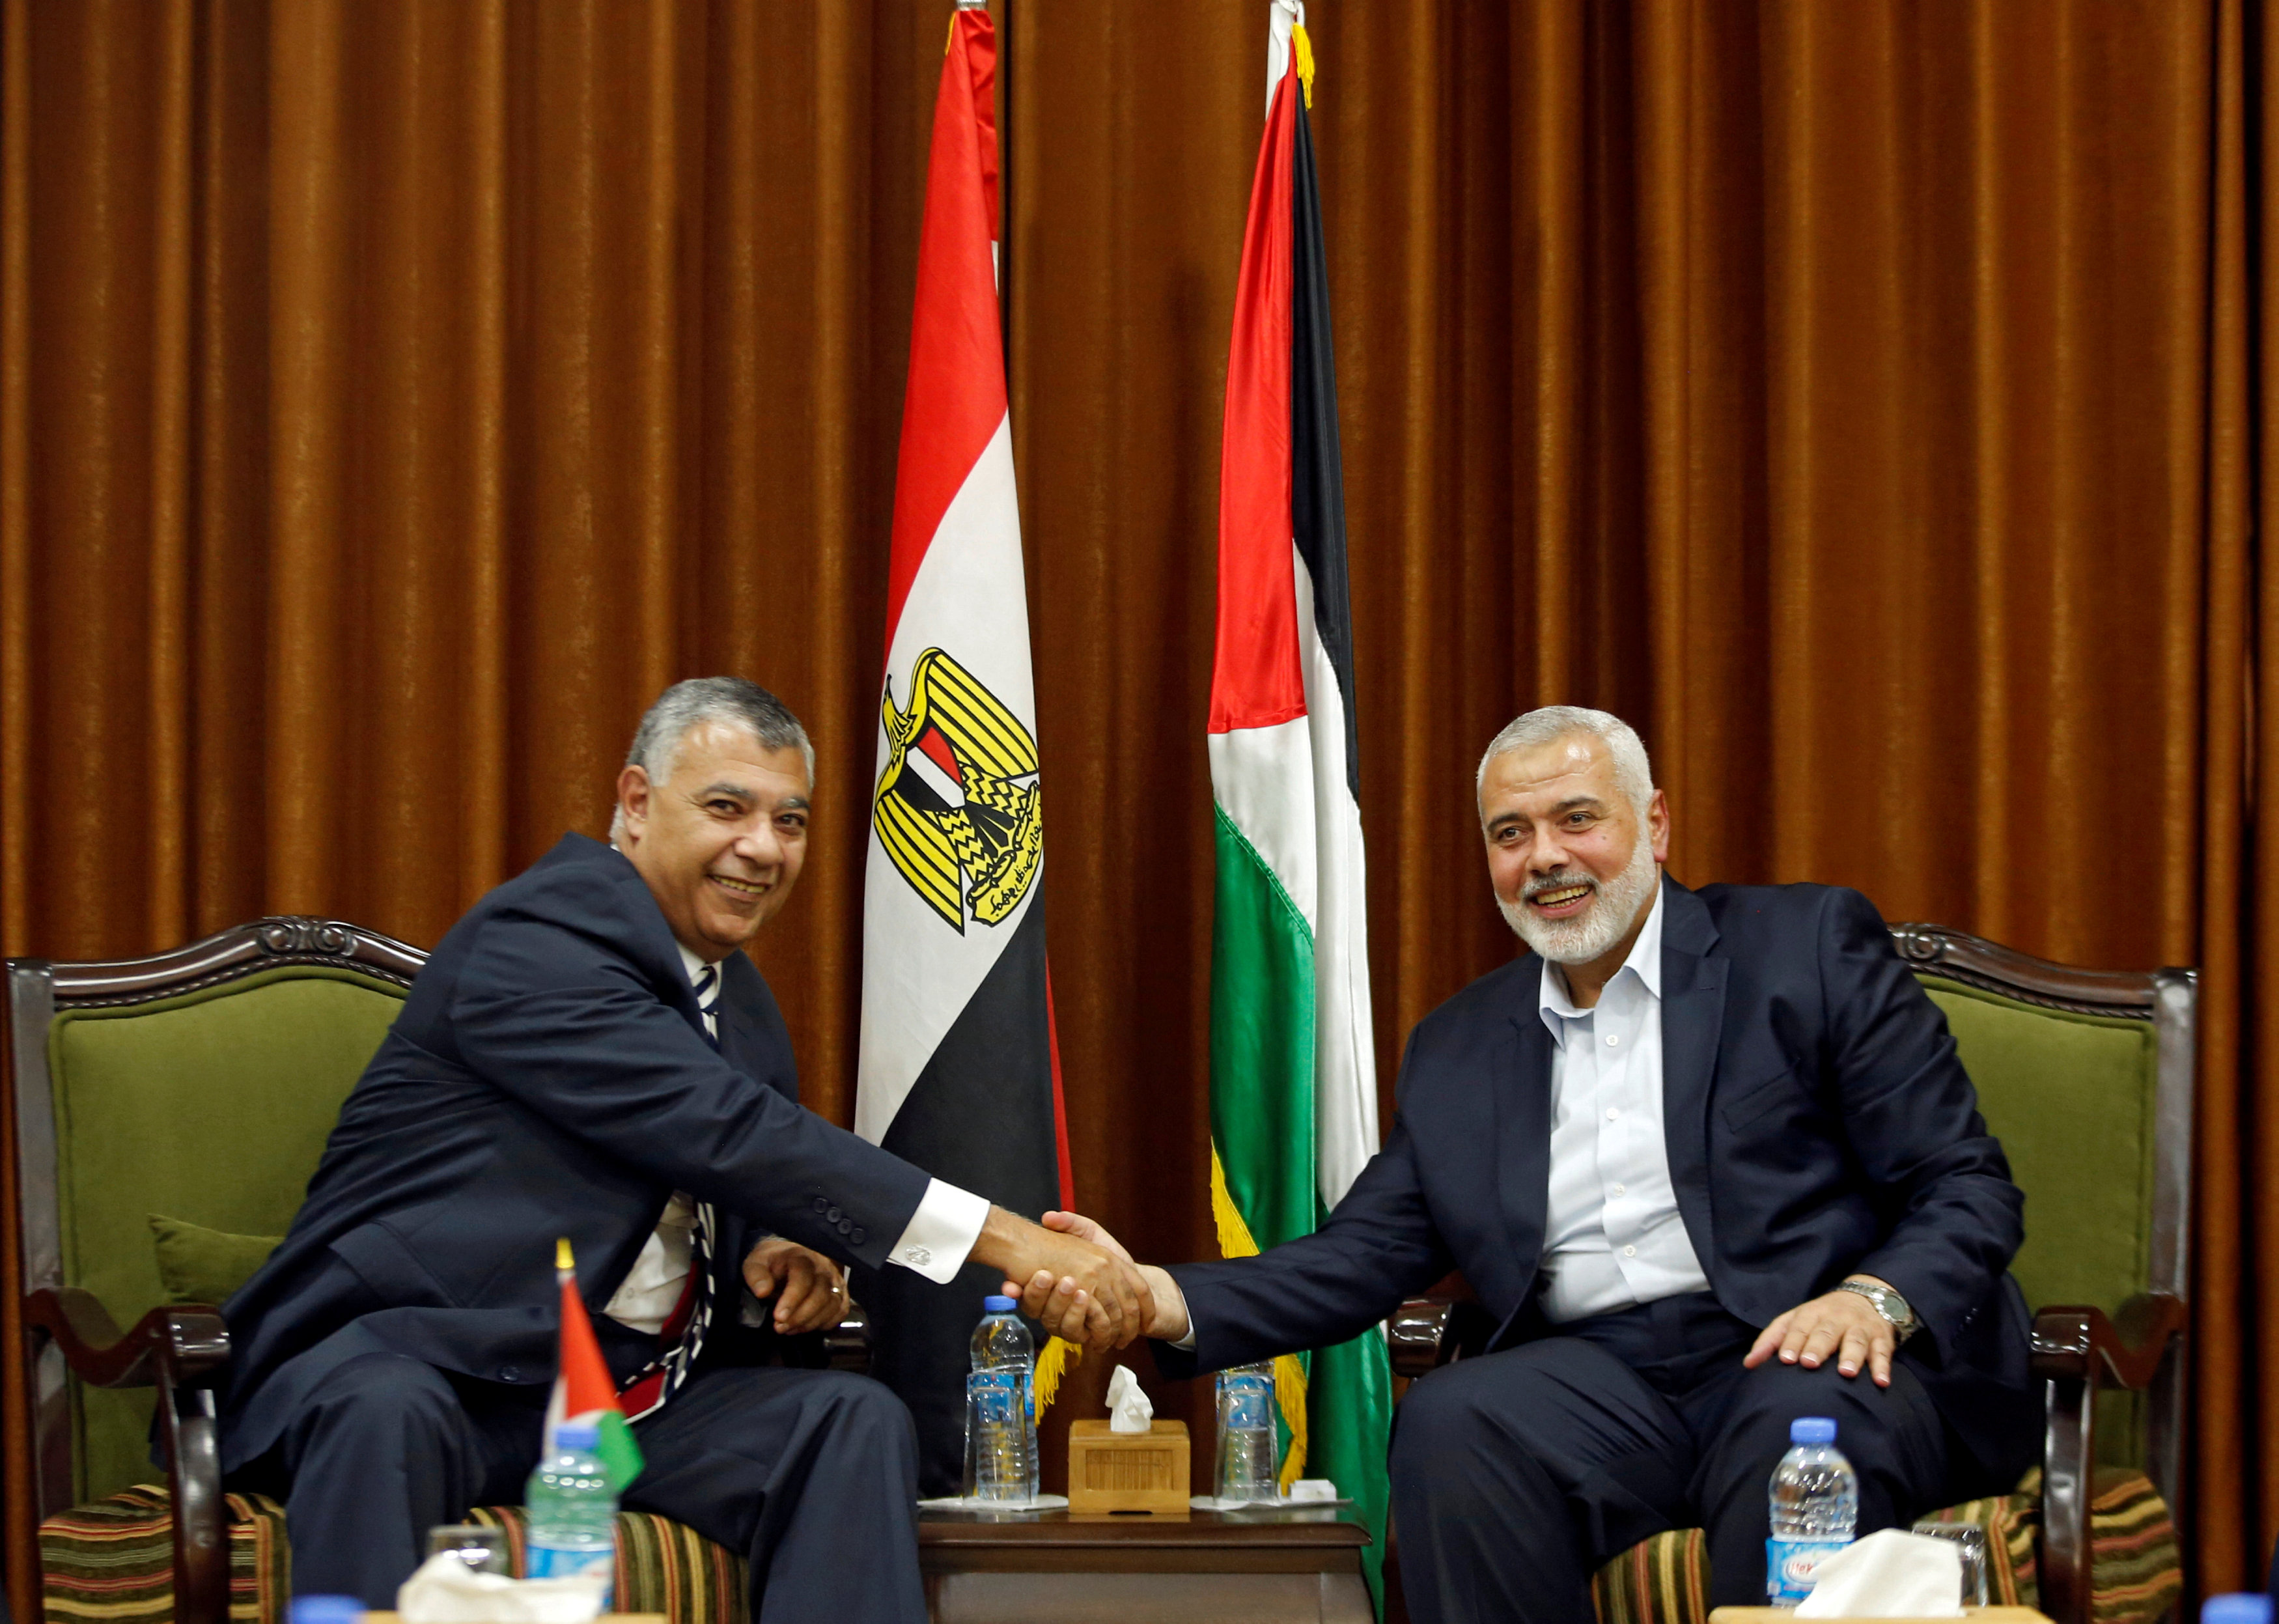 Fatah, Hamas to discuss security in Gaza under unity deal